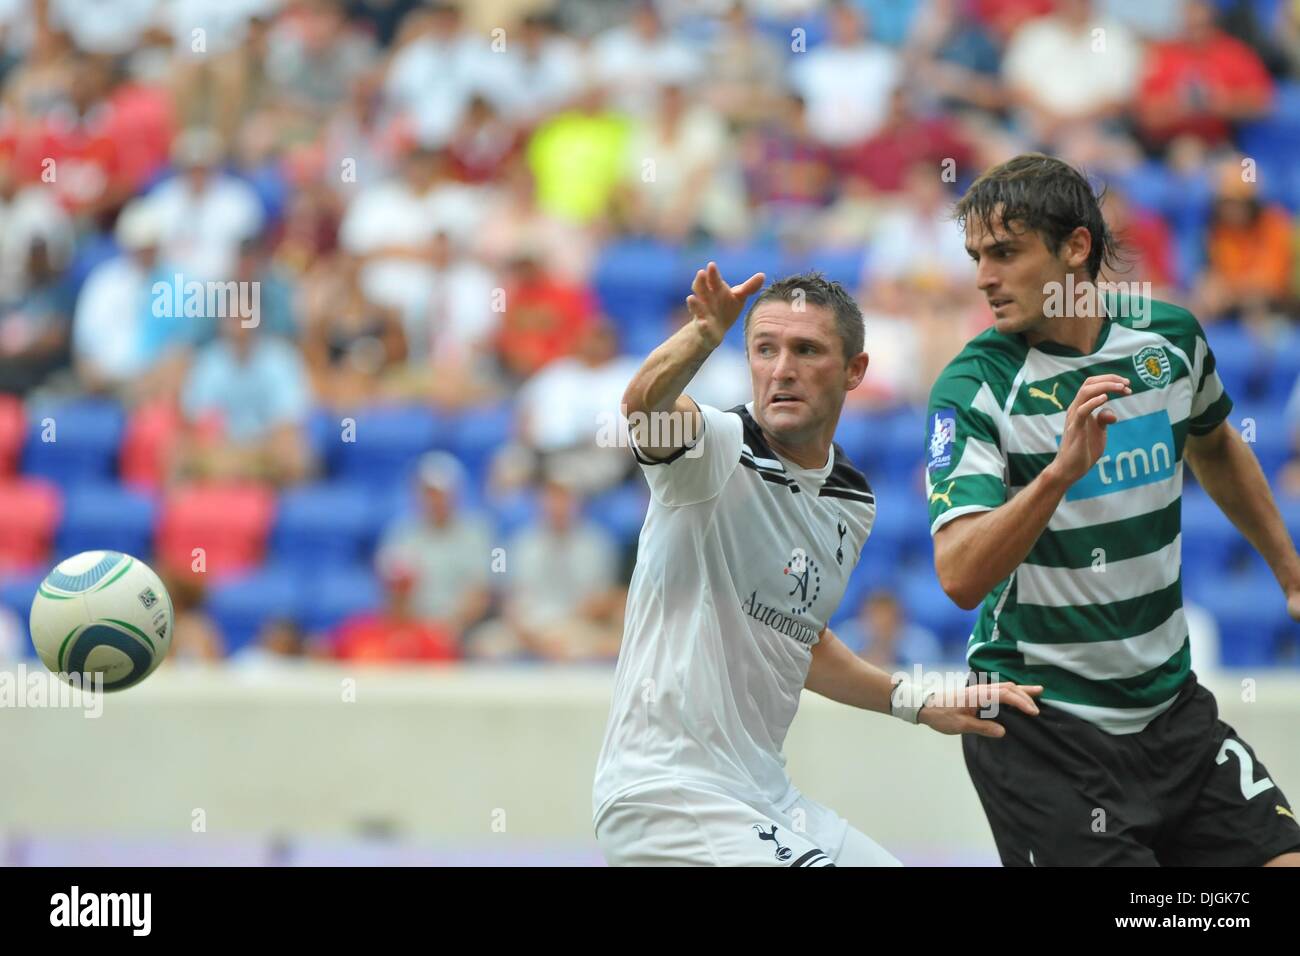 July 25, 2010 - Harrison, New Jersey, United States of America - 25 July 2010 -Tottenham Hotspur FC Striker Robbie Keane (#10) and Sporting Lisbon Defender Miguel Veloso (#24) fight for control as English Premier League Club Tottenham Hotspur face Super Liga club Sporting Club de Portugal in third match of the The Barclays New York Football Challenge at Red Bull Stadium in Harrison Stock Photo